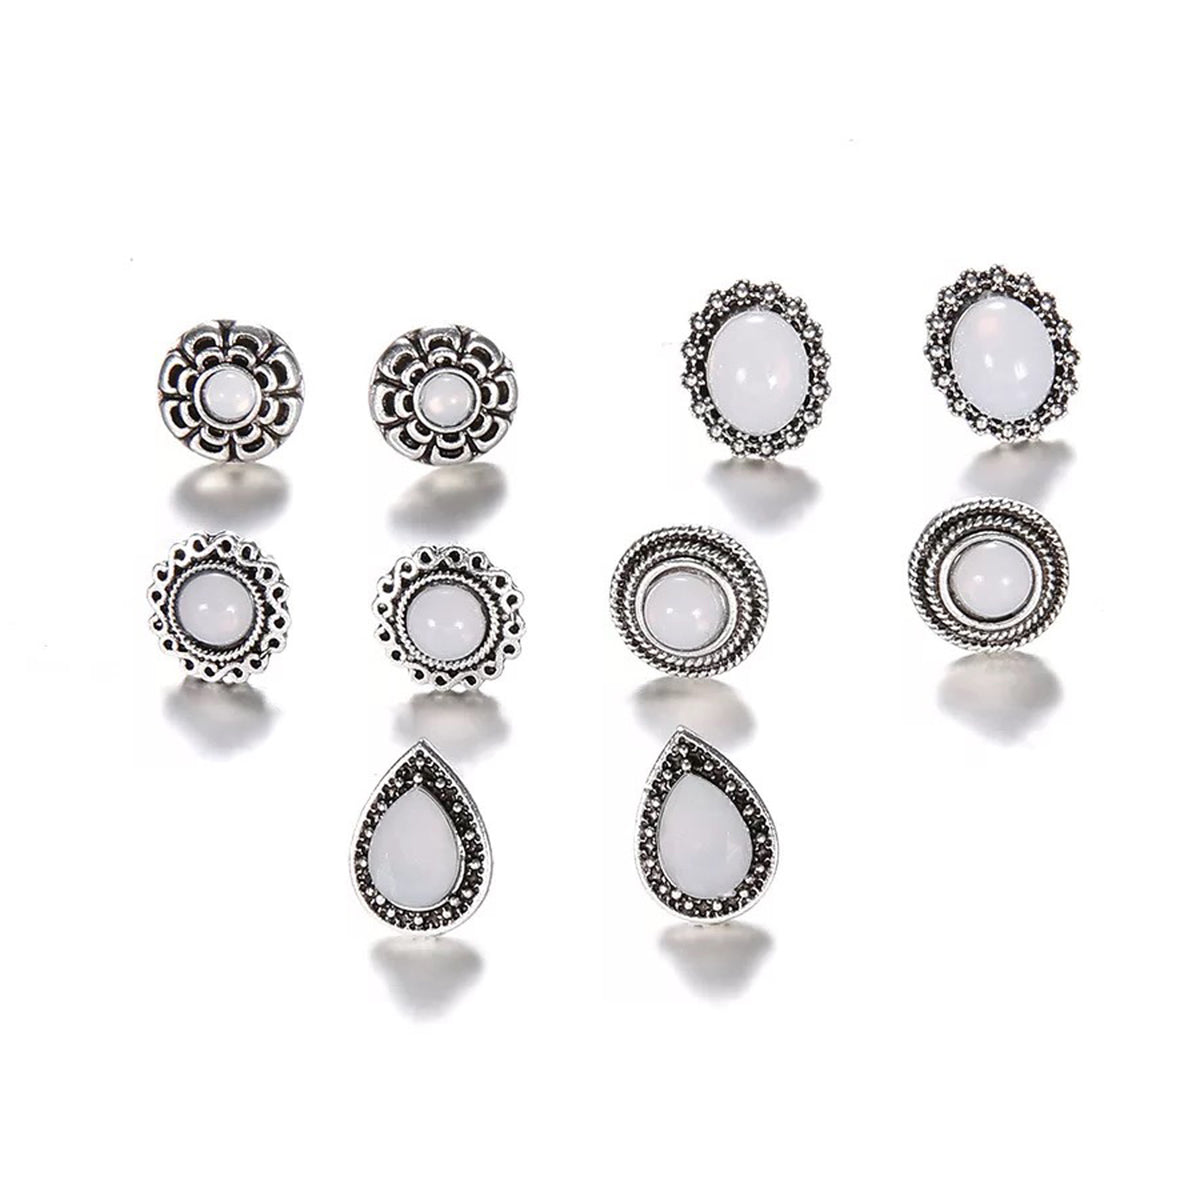 Vienna Old Fashioned Vintage White Acrylic Earring Studs Set 5 Pairs i ...